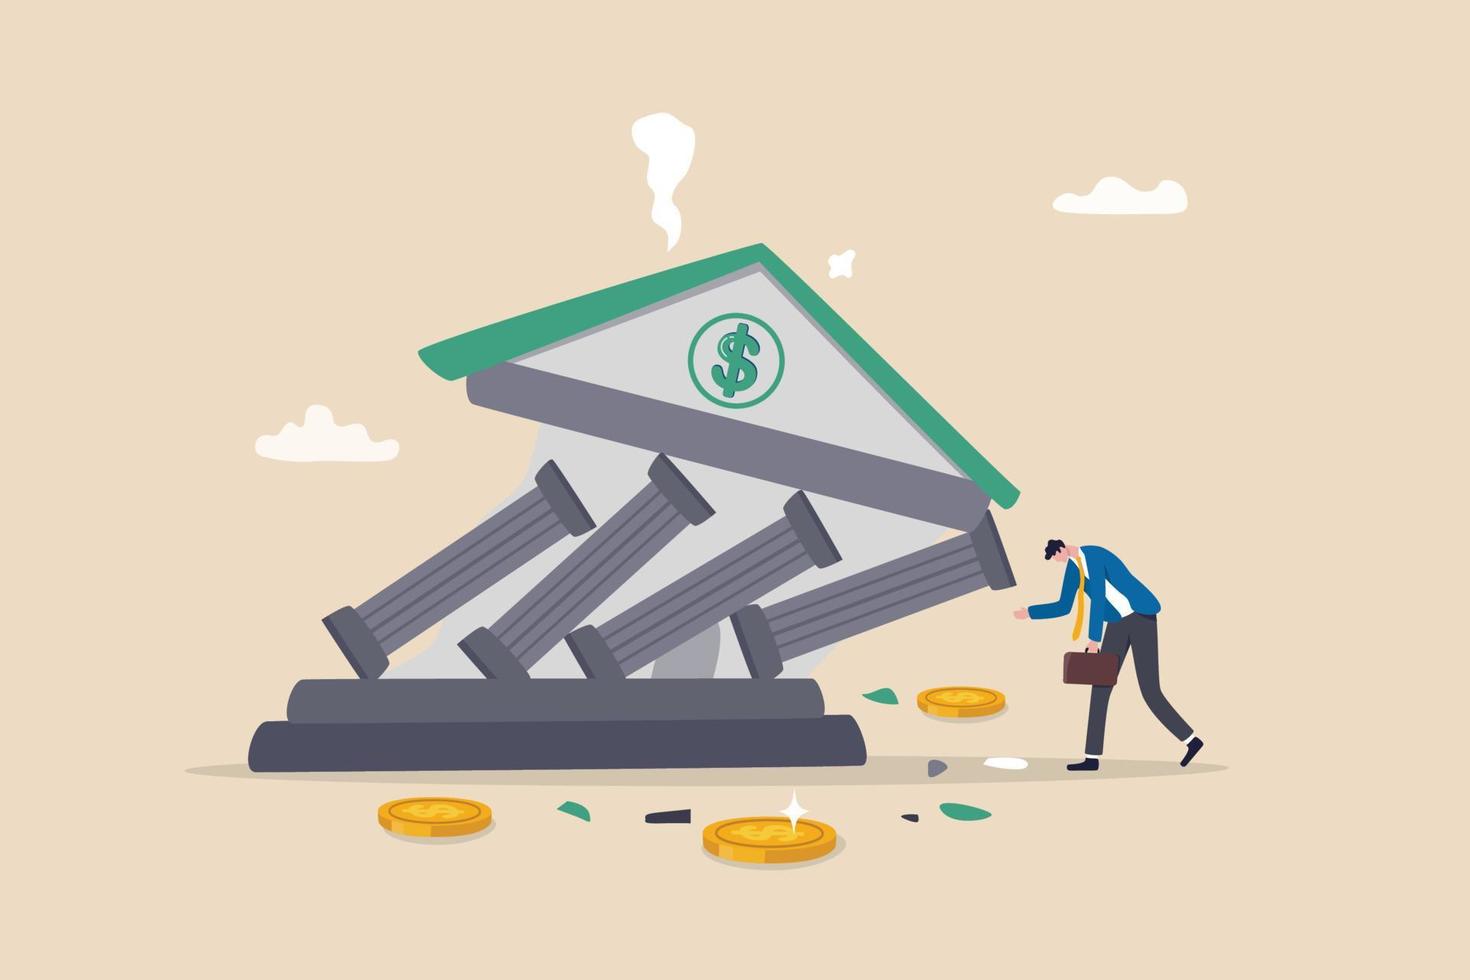 Banking collapse or bank run, financial crisis or bankruptcy problem, stock market crash or credit risk, failure or investment failure concept, frustrated businessman look at collapsing bank building. vector